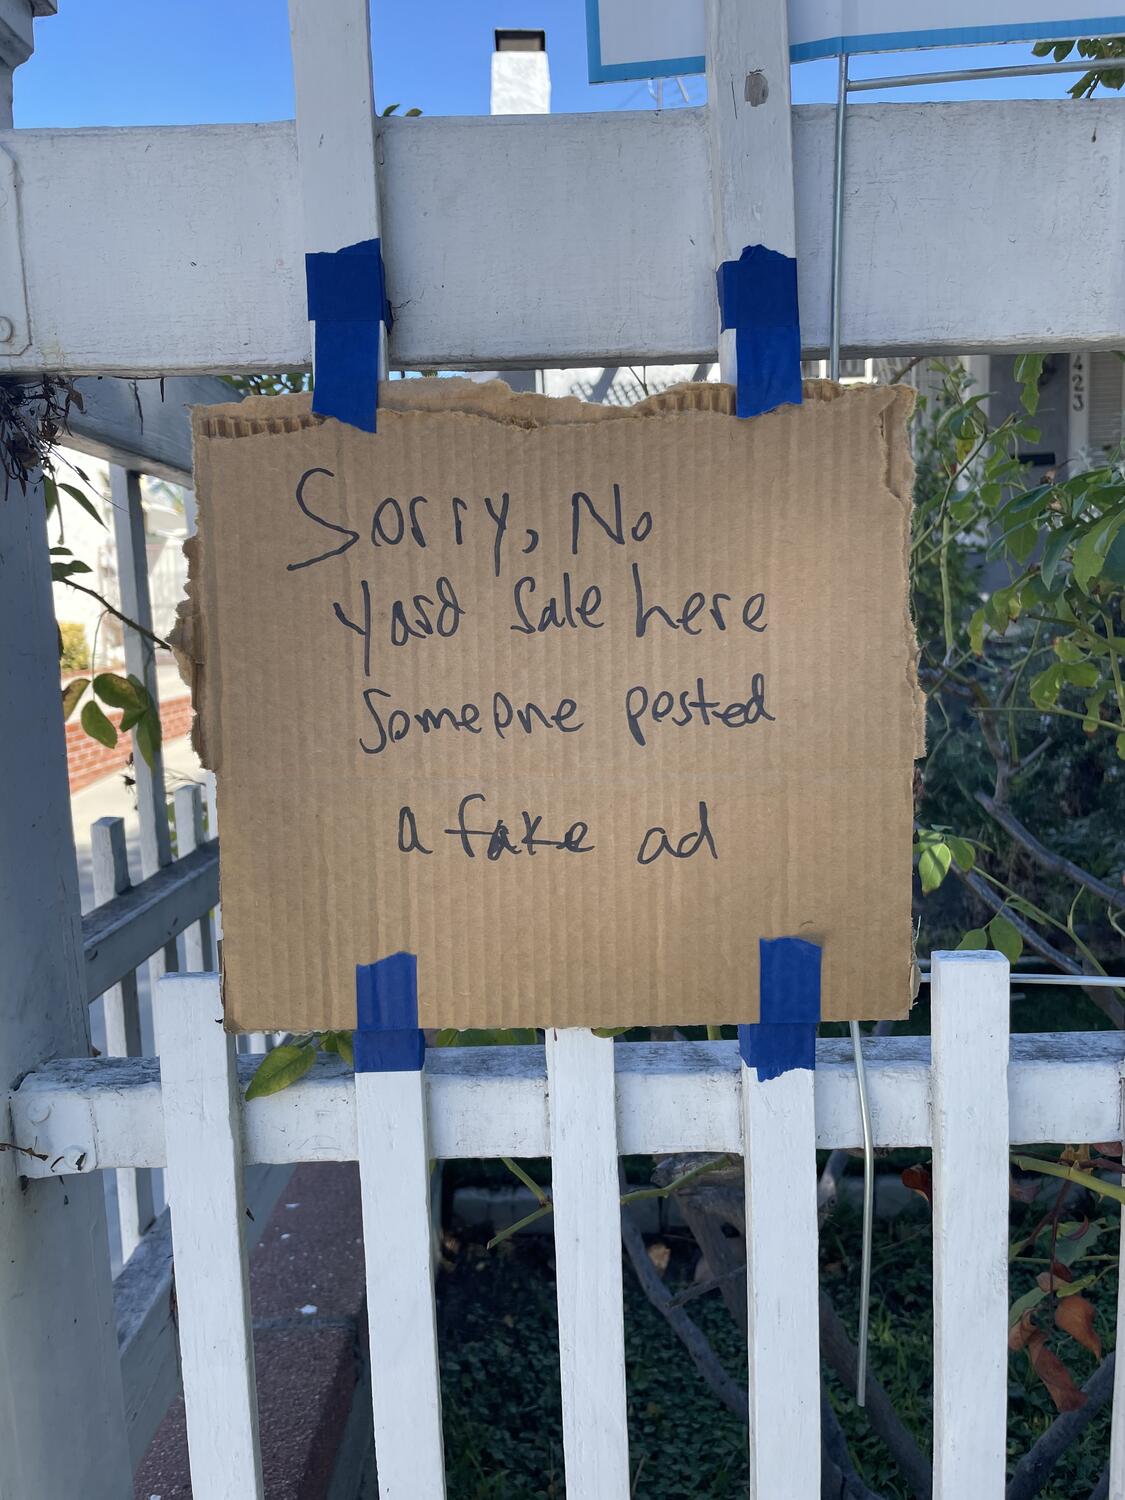 A cardboard sign taped to a fence. It reads â€œSorry, no yard sale here - someone posted a fake ad.â€�